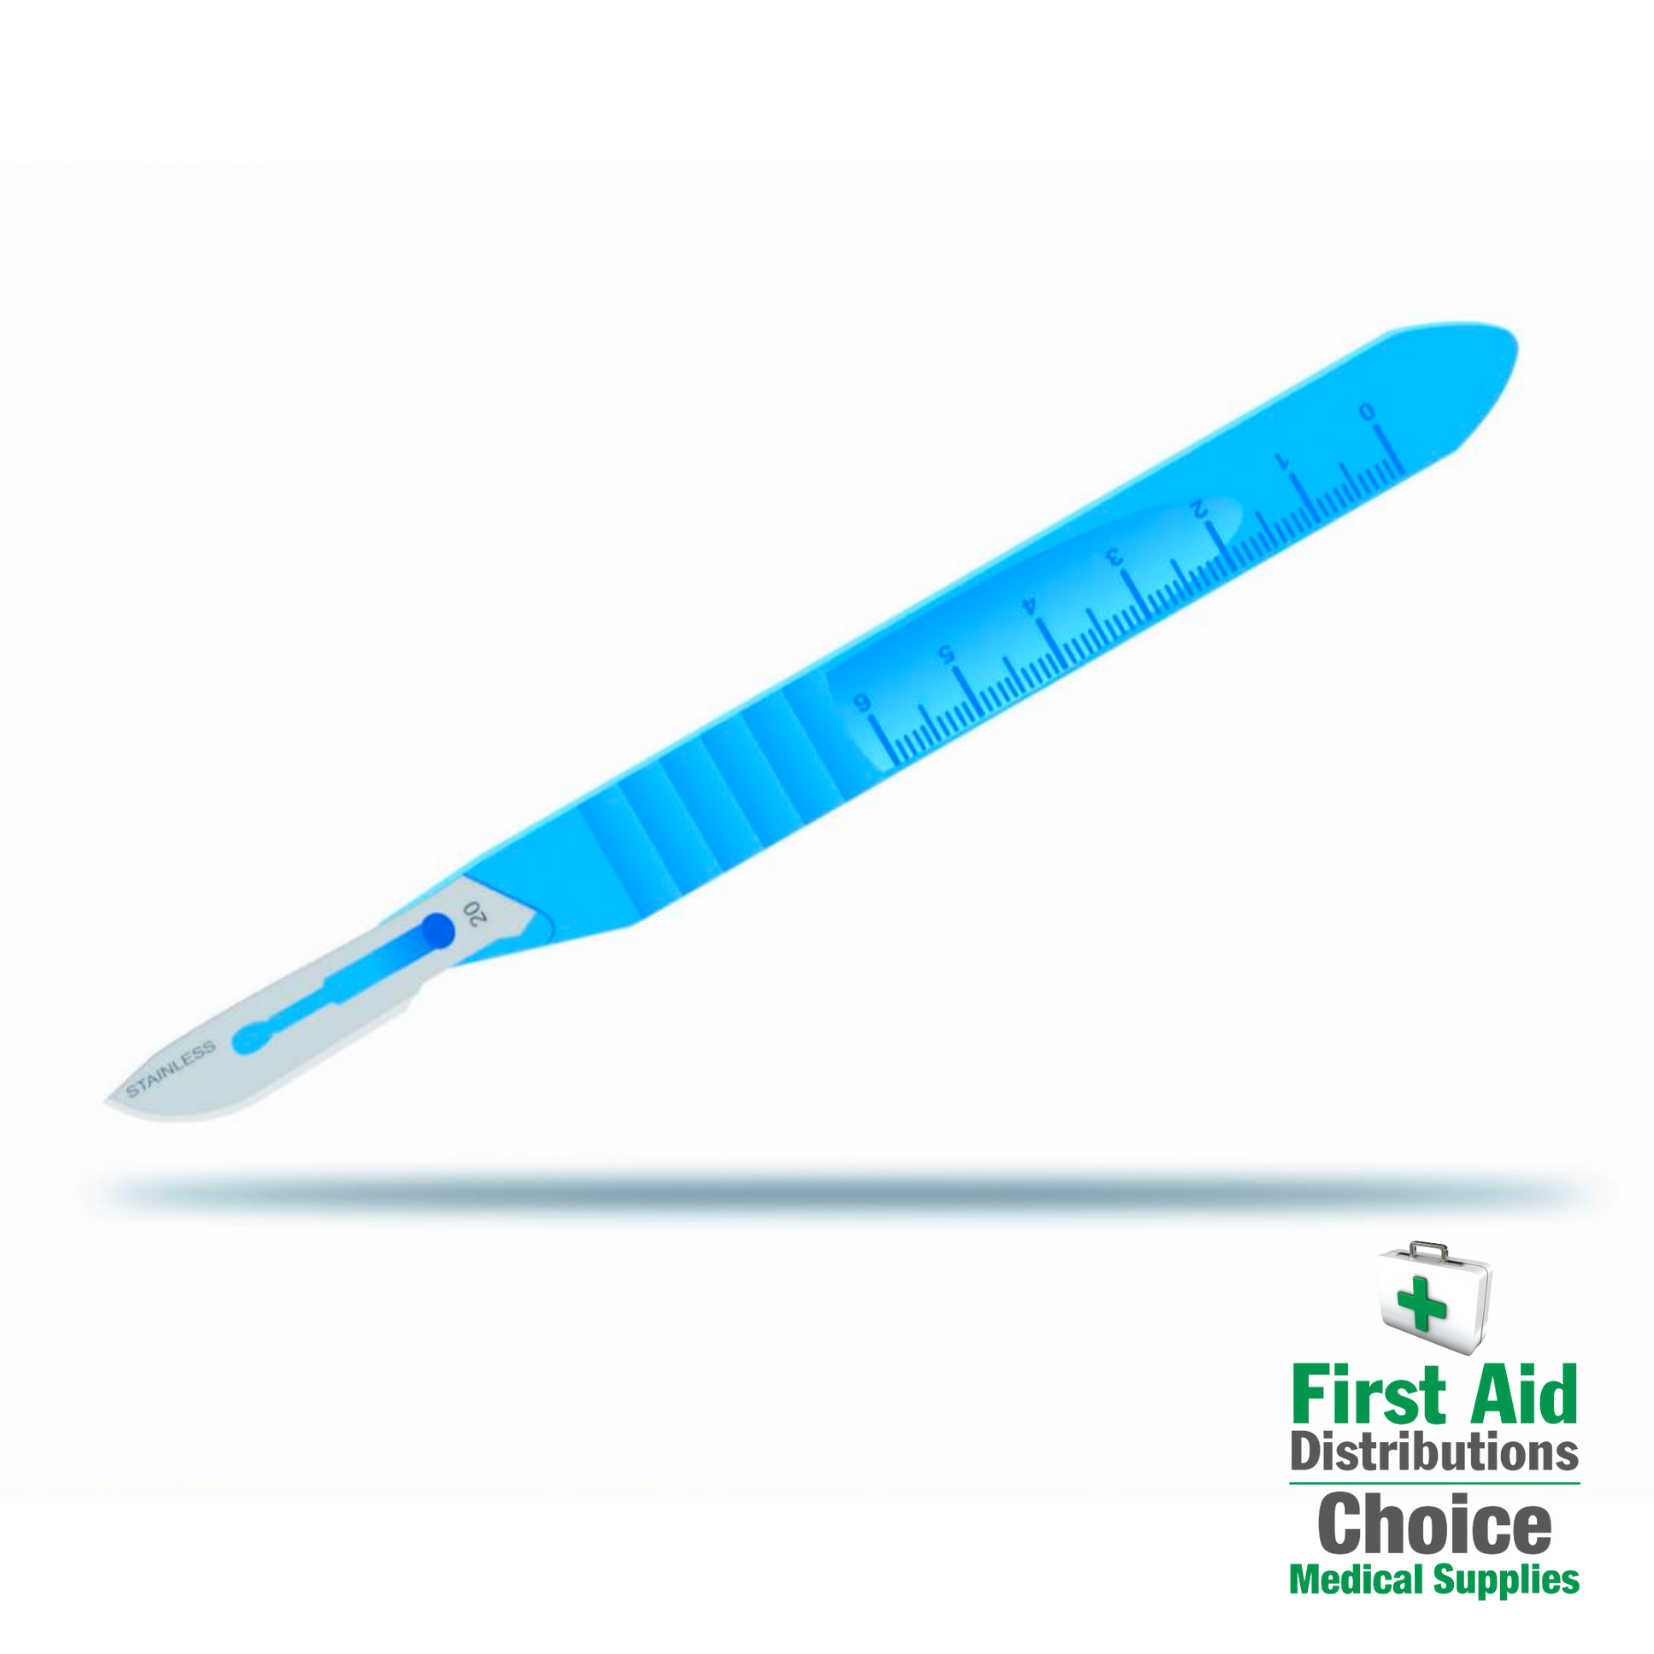 collections/Scalpel_Disposable_First_Aid_Distributions_1.png